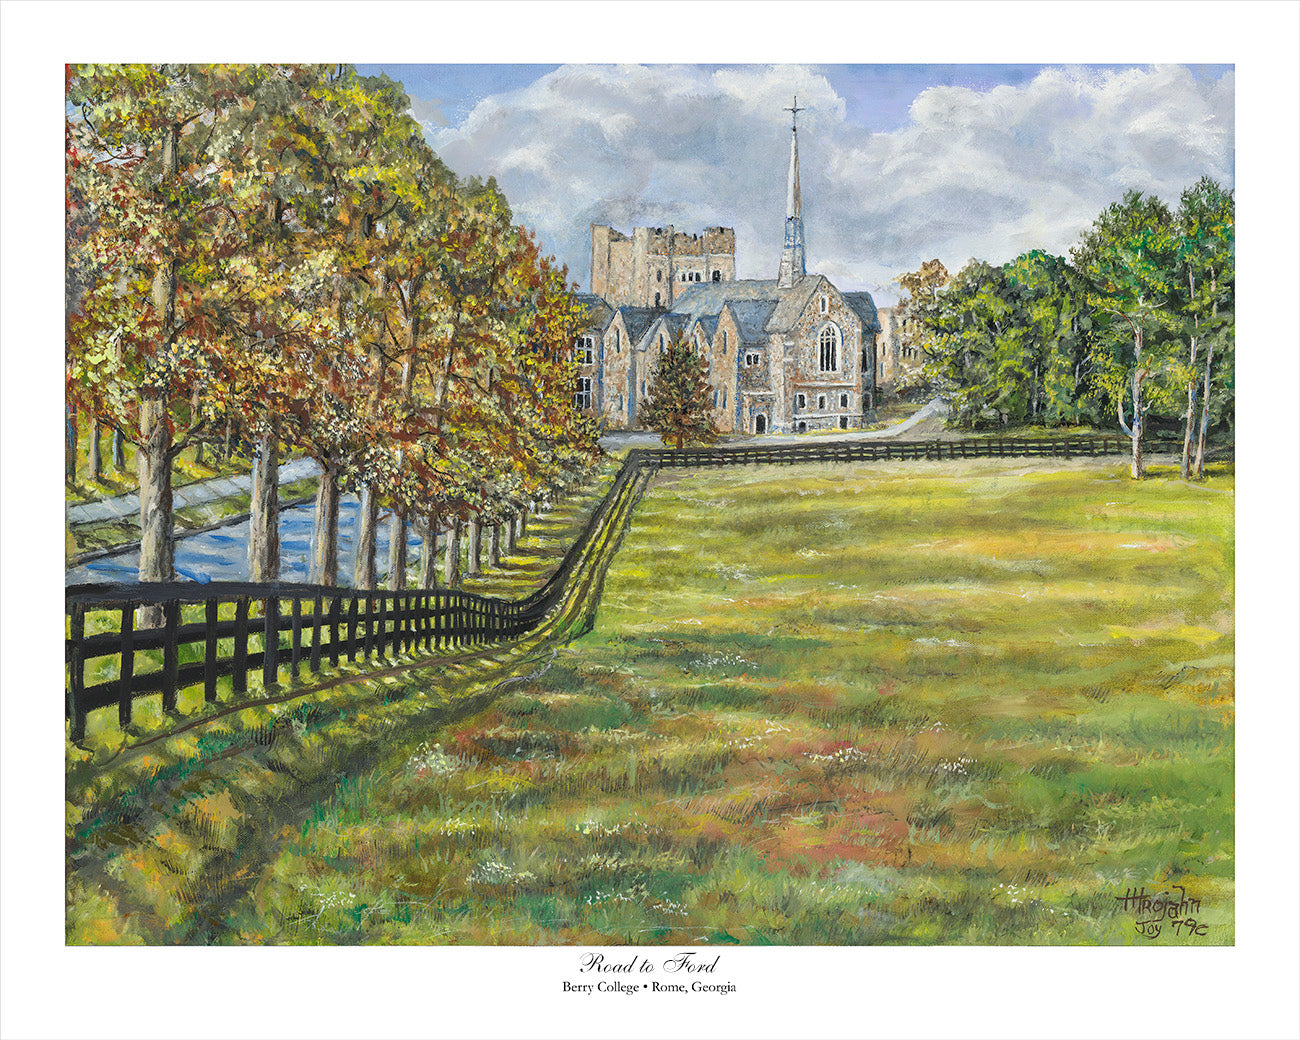 "Road to Ford at Berry College" Print